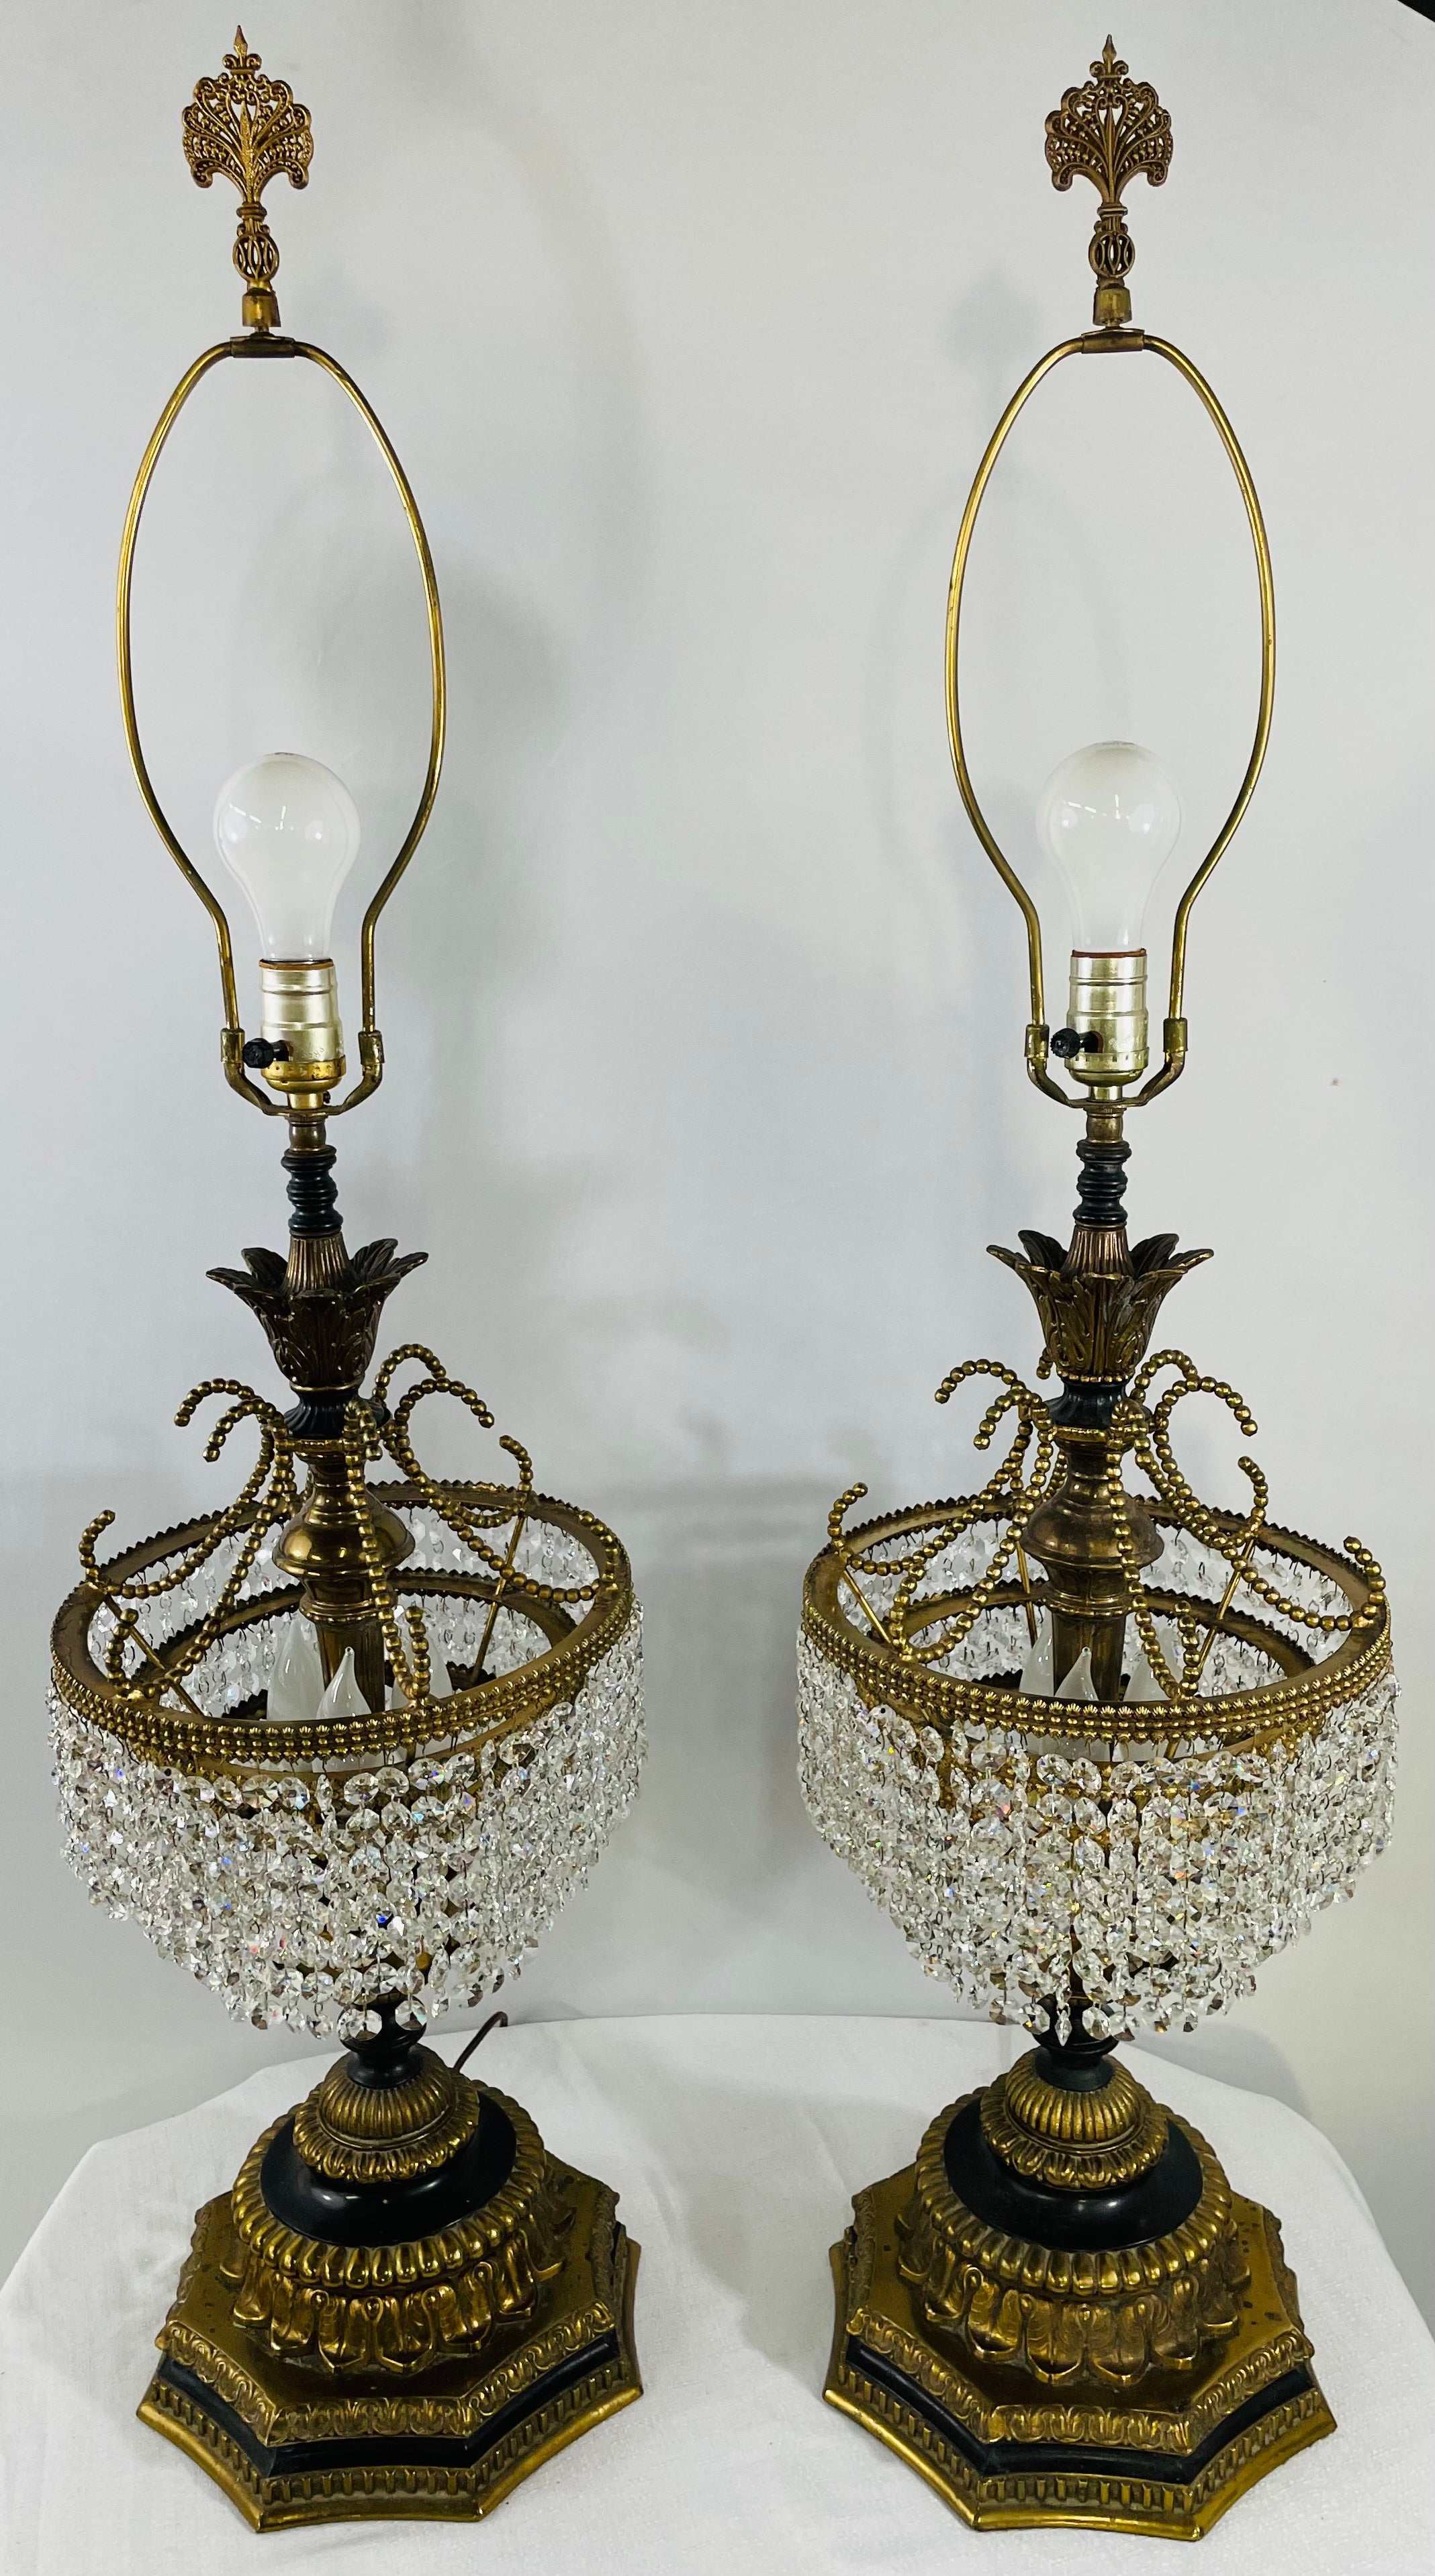 A Pair of majestic French Empire Hollywood Regency table lamps. The column of the lamp is carved of bronze in the shape of a blossoming flower attached to a three tier wedding cake with clear crystals. The table lamps three dimensional base is made